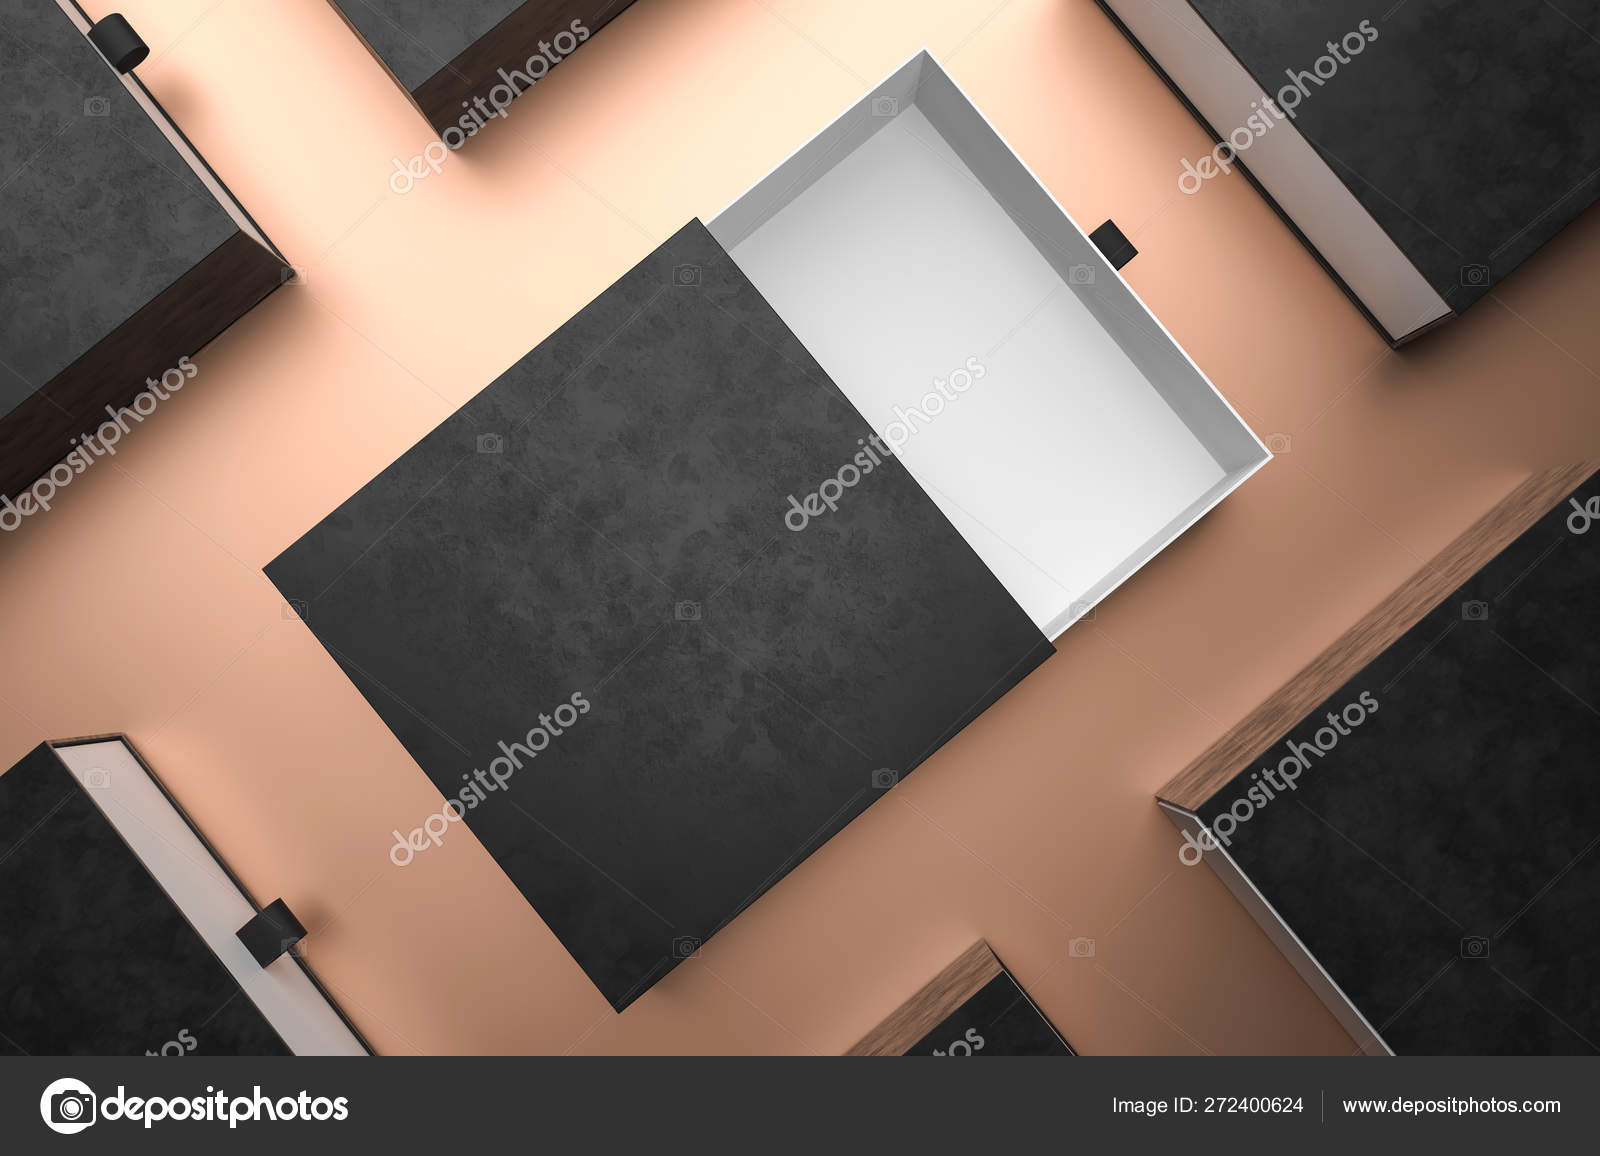 Download Elegant Open Black Gift Box Mockup On Black Background Luxury Packaging Box For Premium Products Presentation Empty Opened Branding Box Mock Up 3d Rendering Stock Photo Image By C Volmon Tut By 272400624